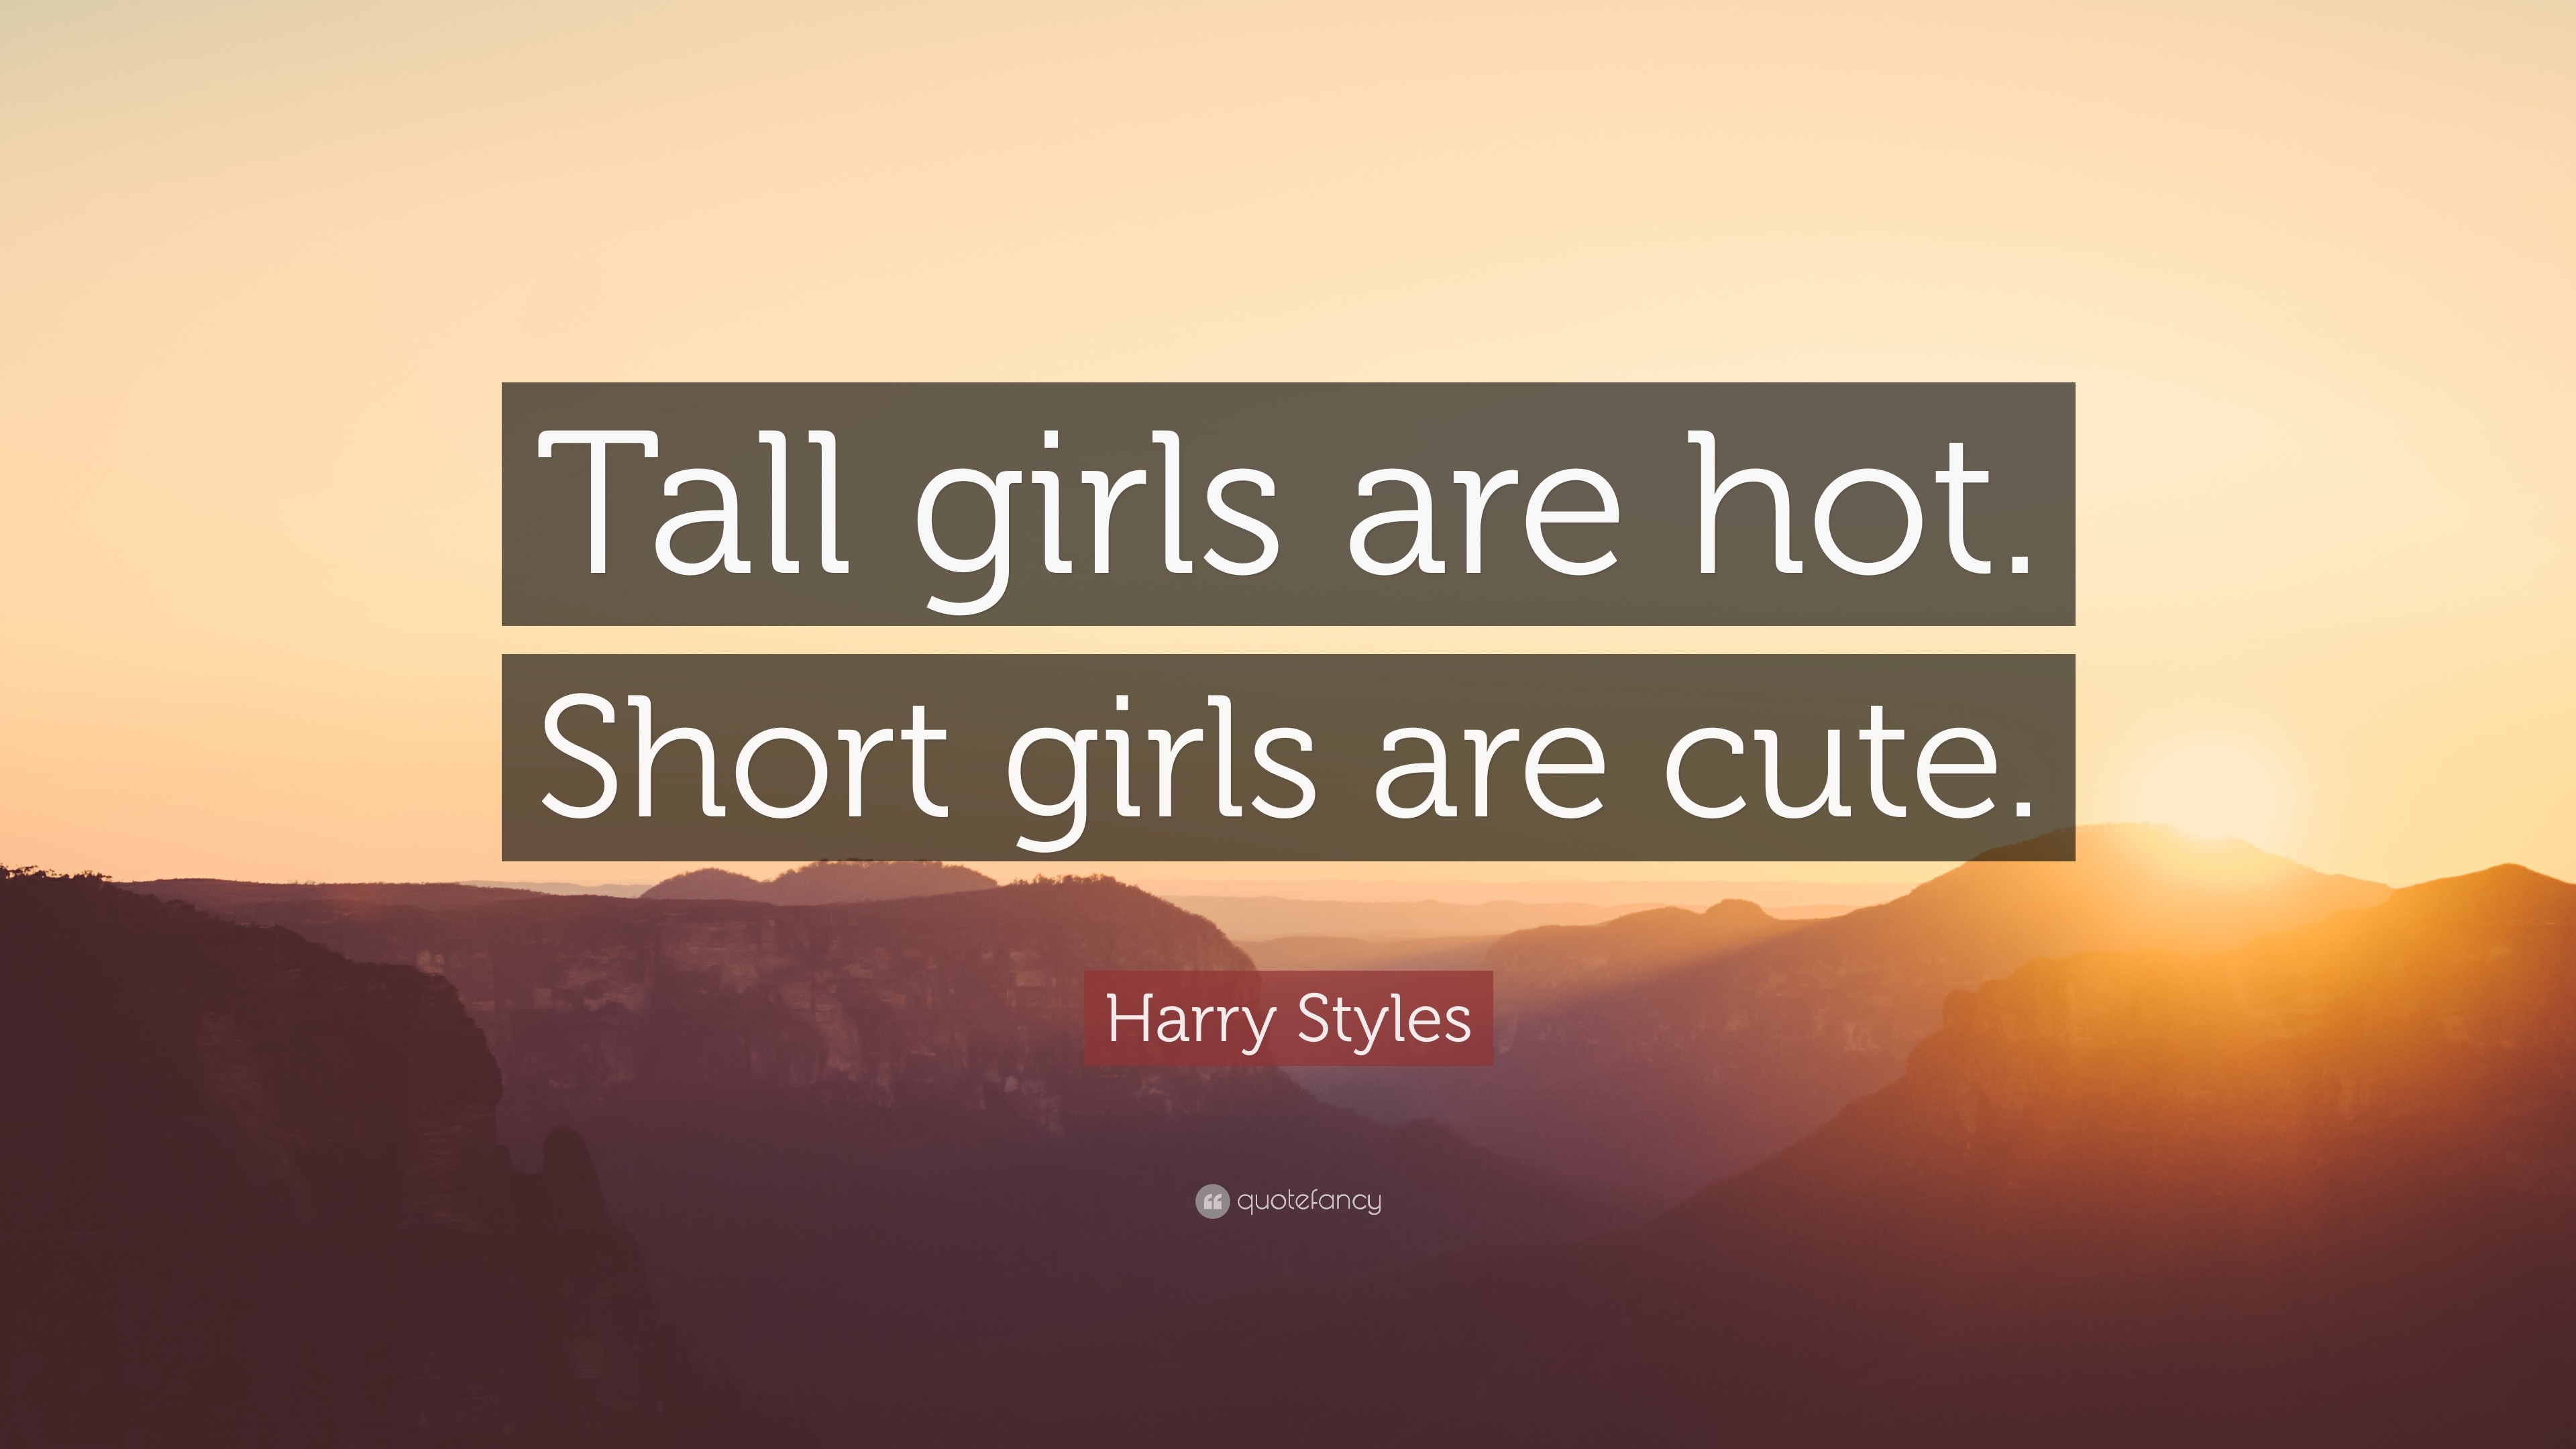 3840x2160 Harry Styles Quote: “Tall girls are hot. Short girls are cute.”